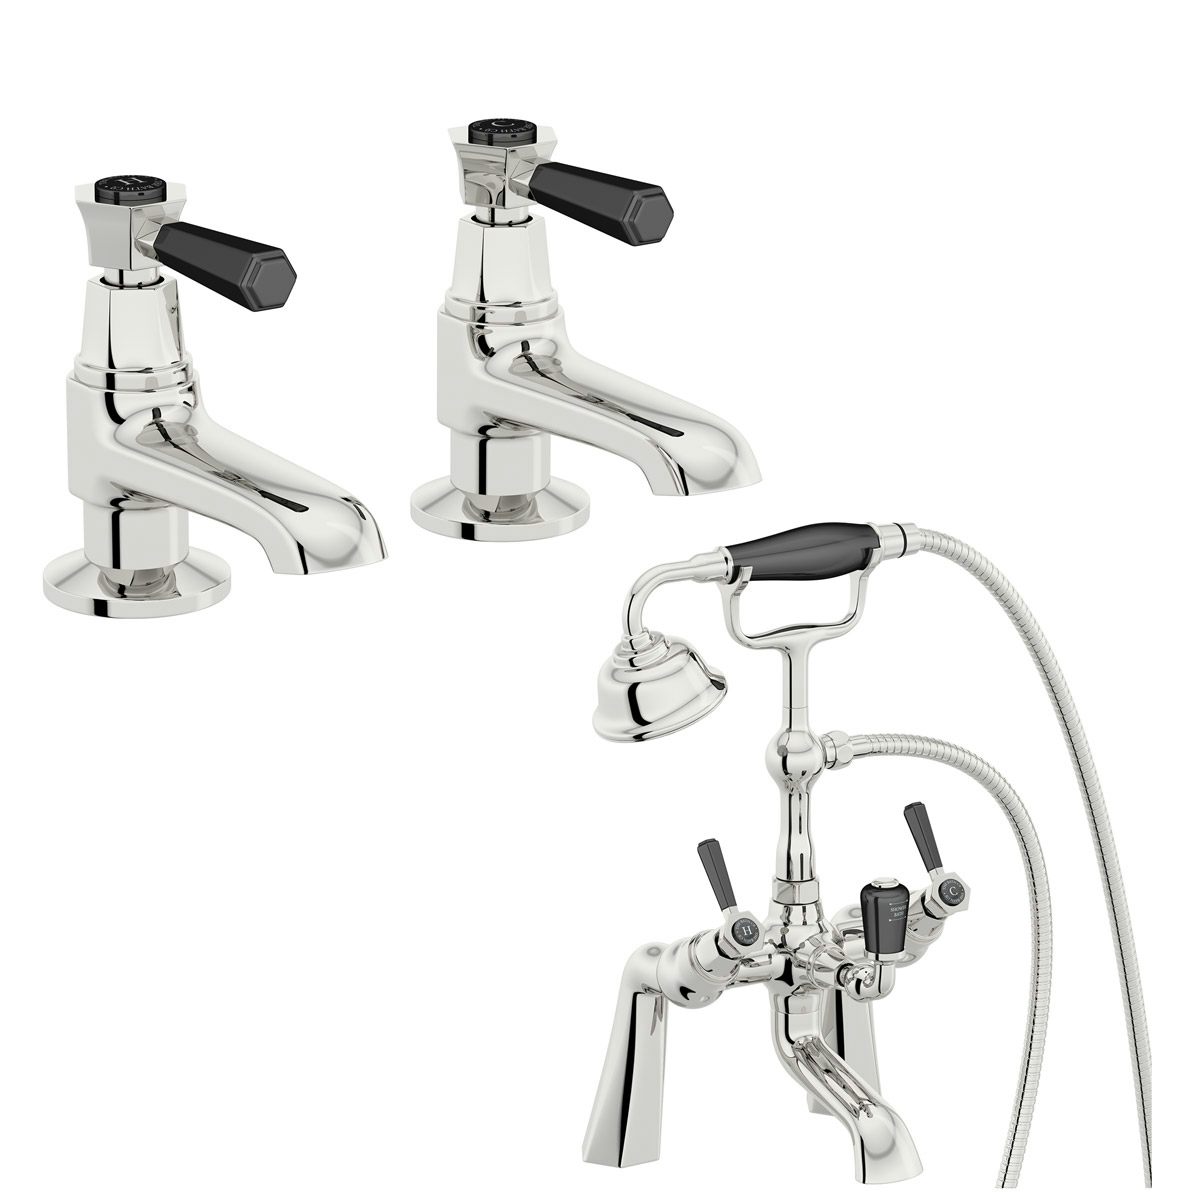 The Bath Co. Beaumont lever basin pillar and bath shower mixer tap pack